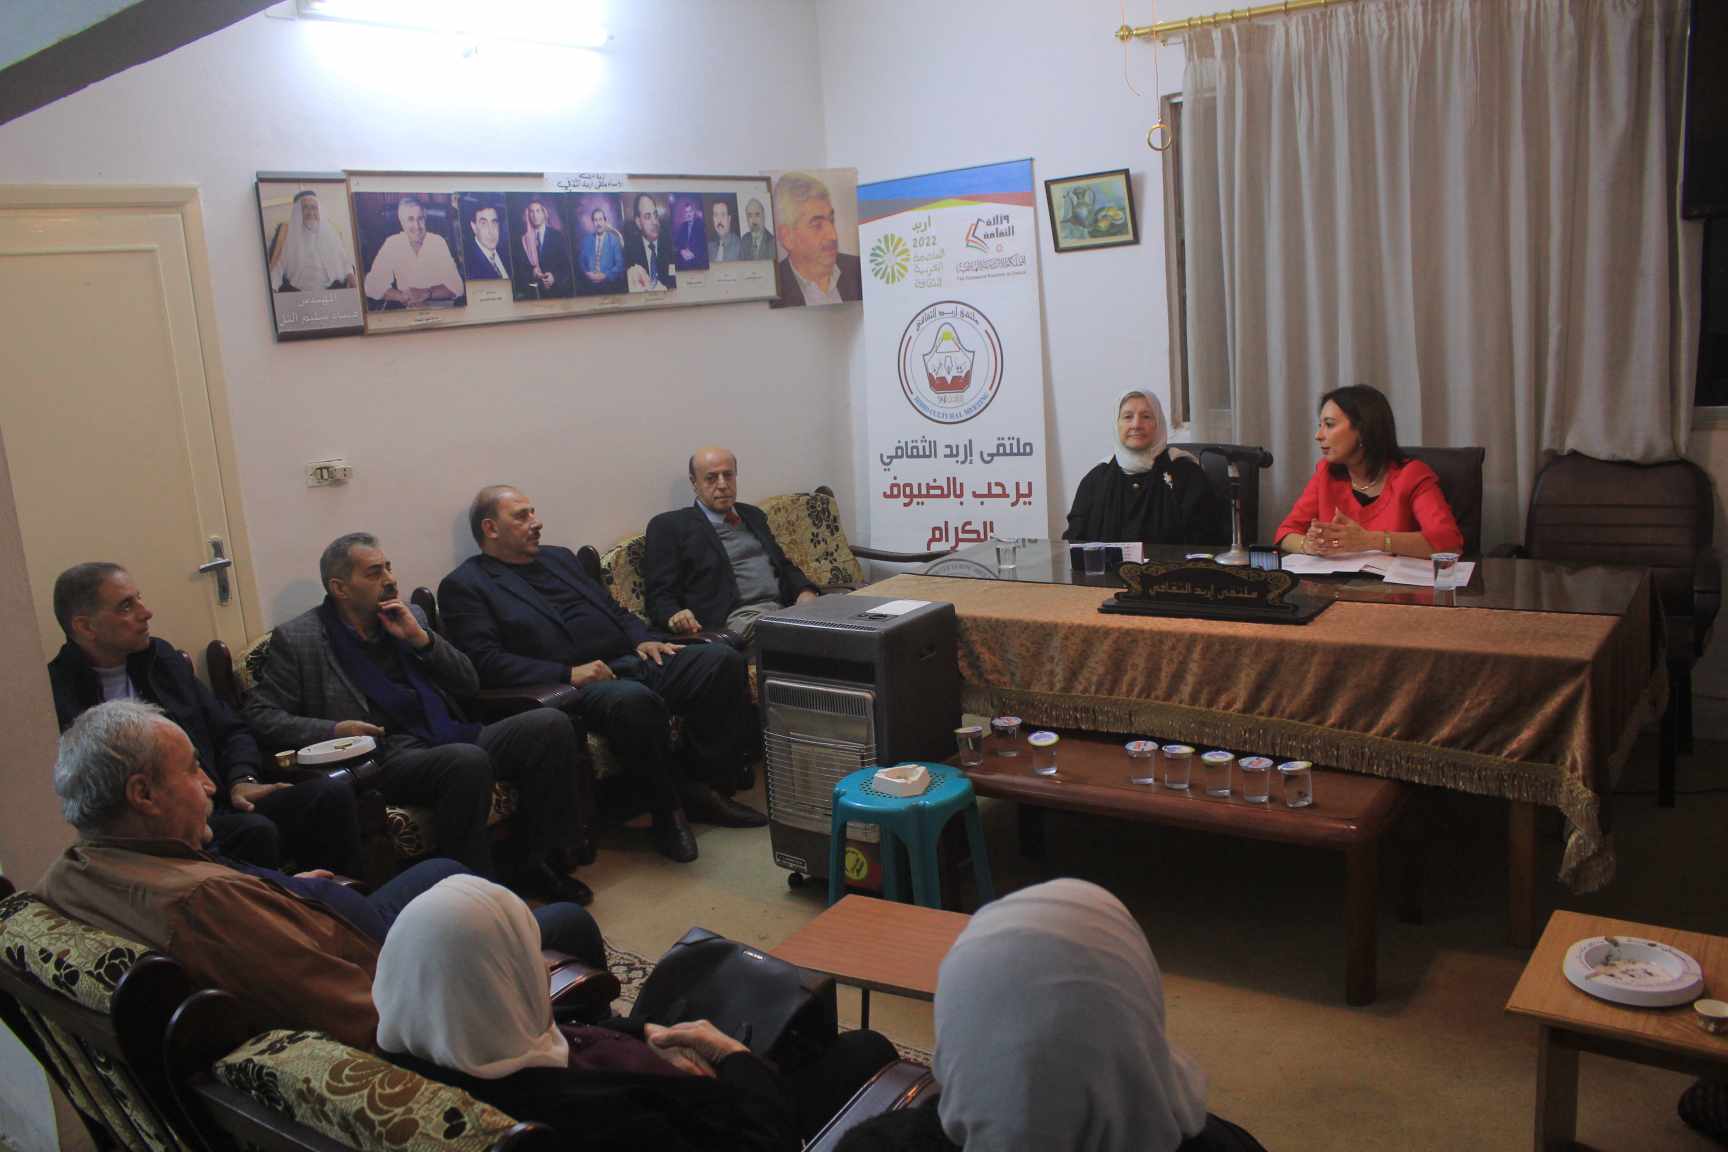 Dr. Batoul Al-Muhaisen, Director of the Center, participated in a dialogue with the Irbid Cultural Forum about women’s party life